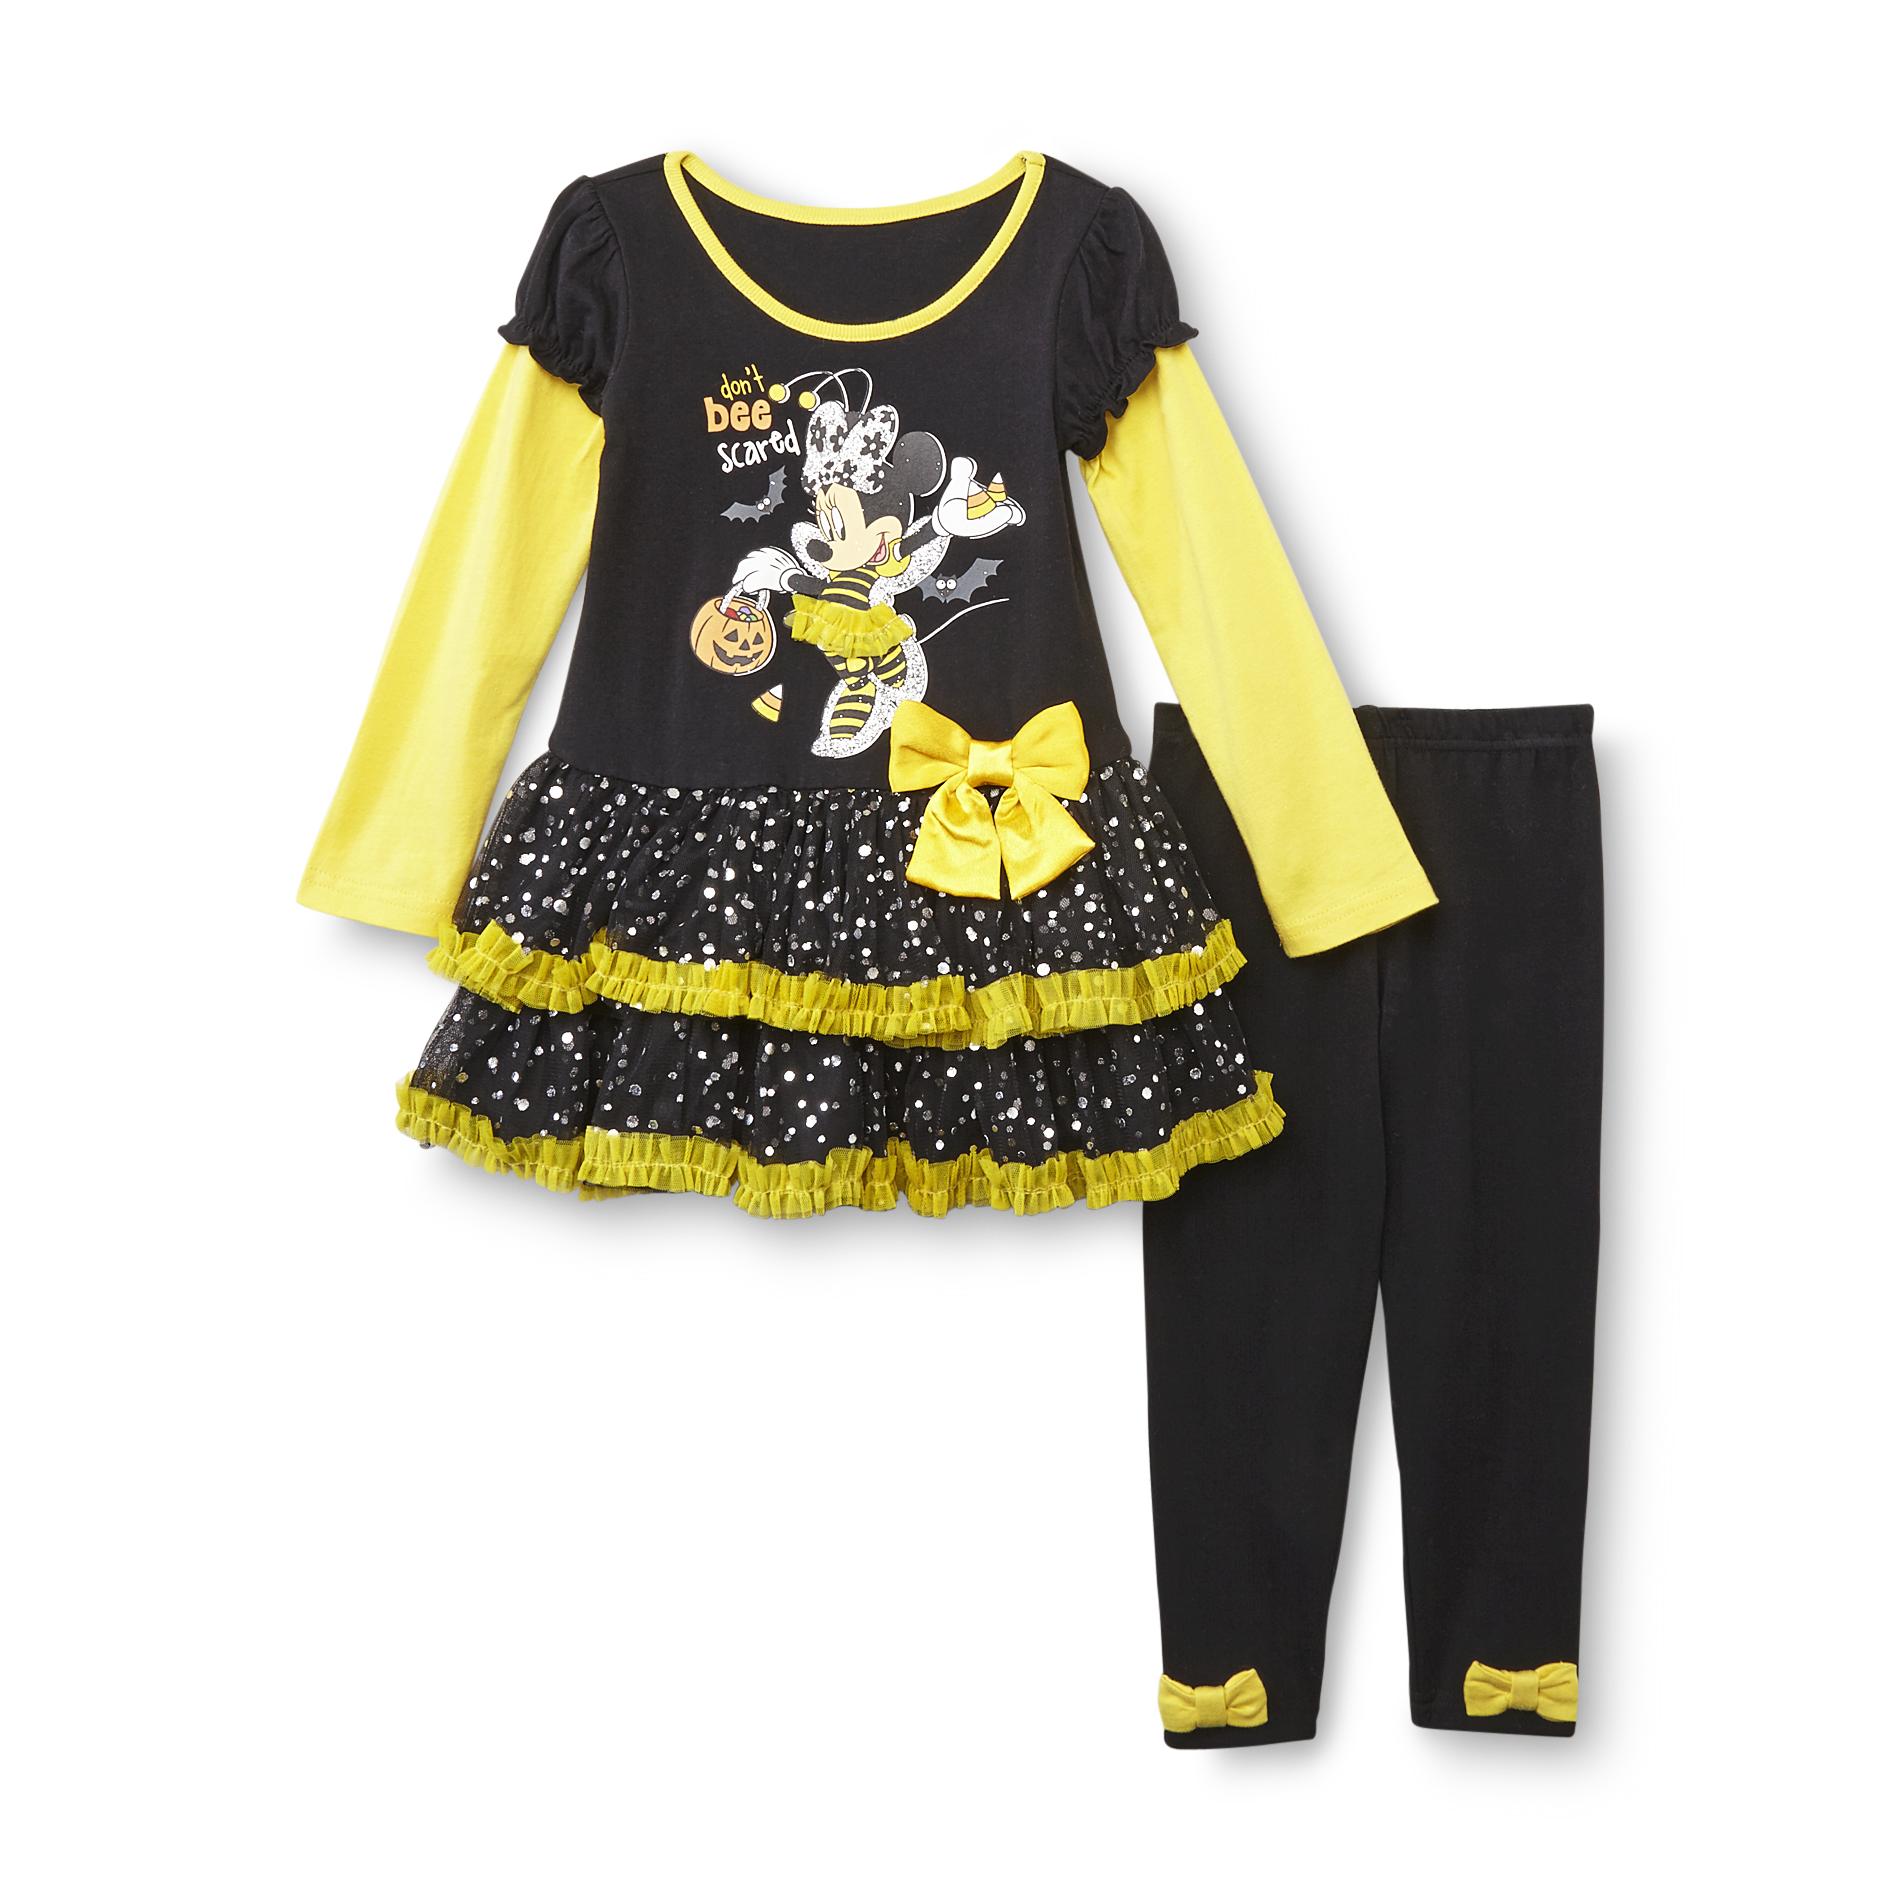 Disney Infant & Toddler Girl's Tunic Top & Leggings - Minnie Mouse